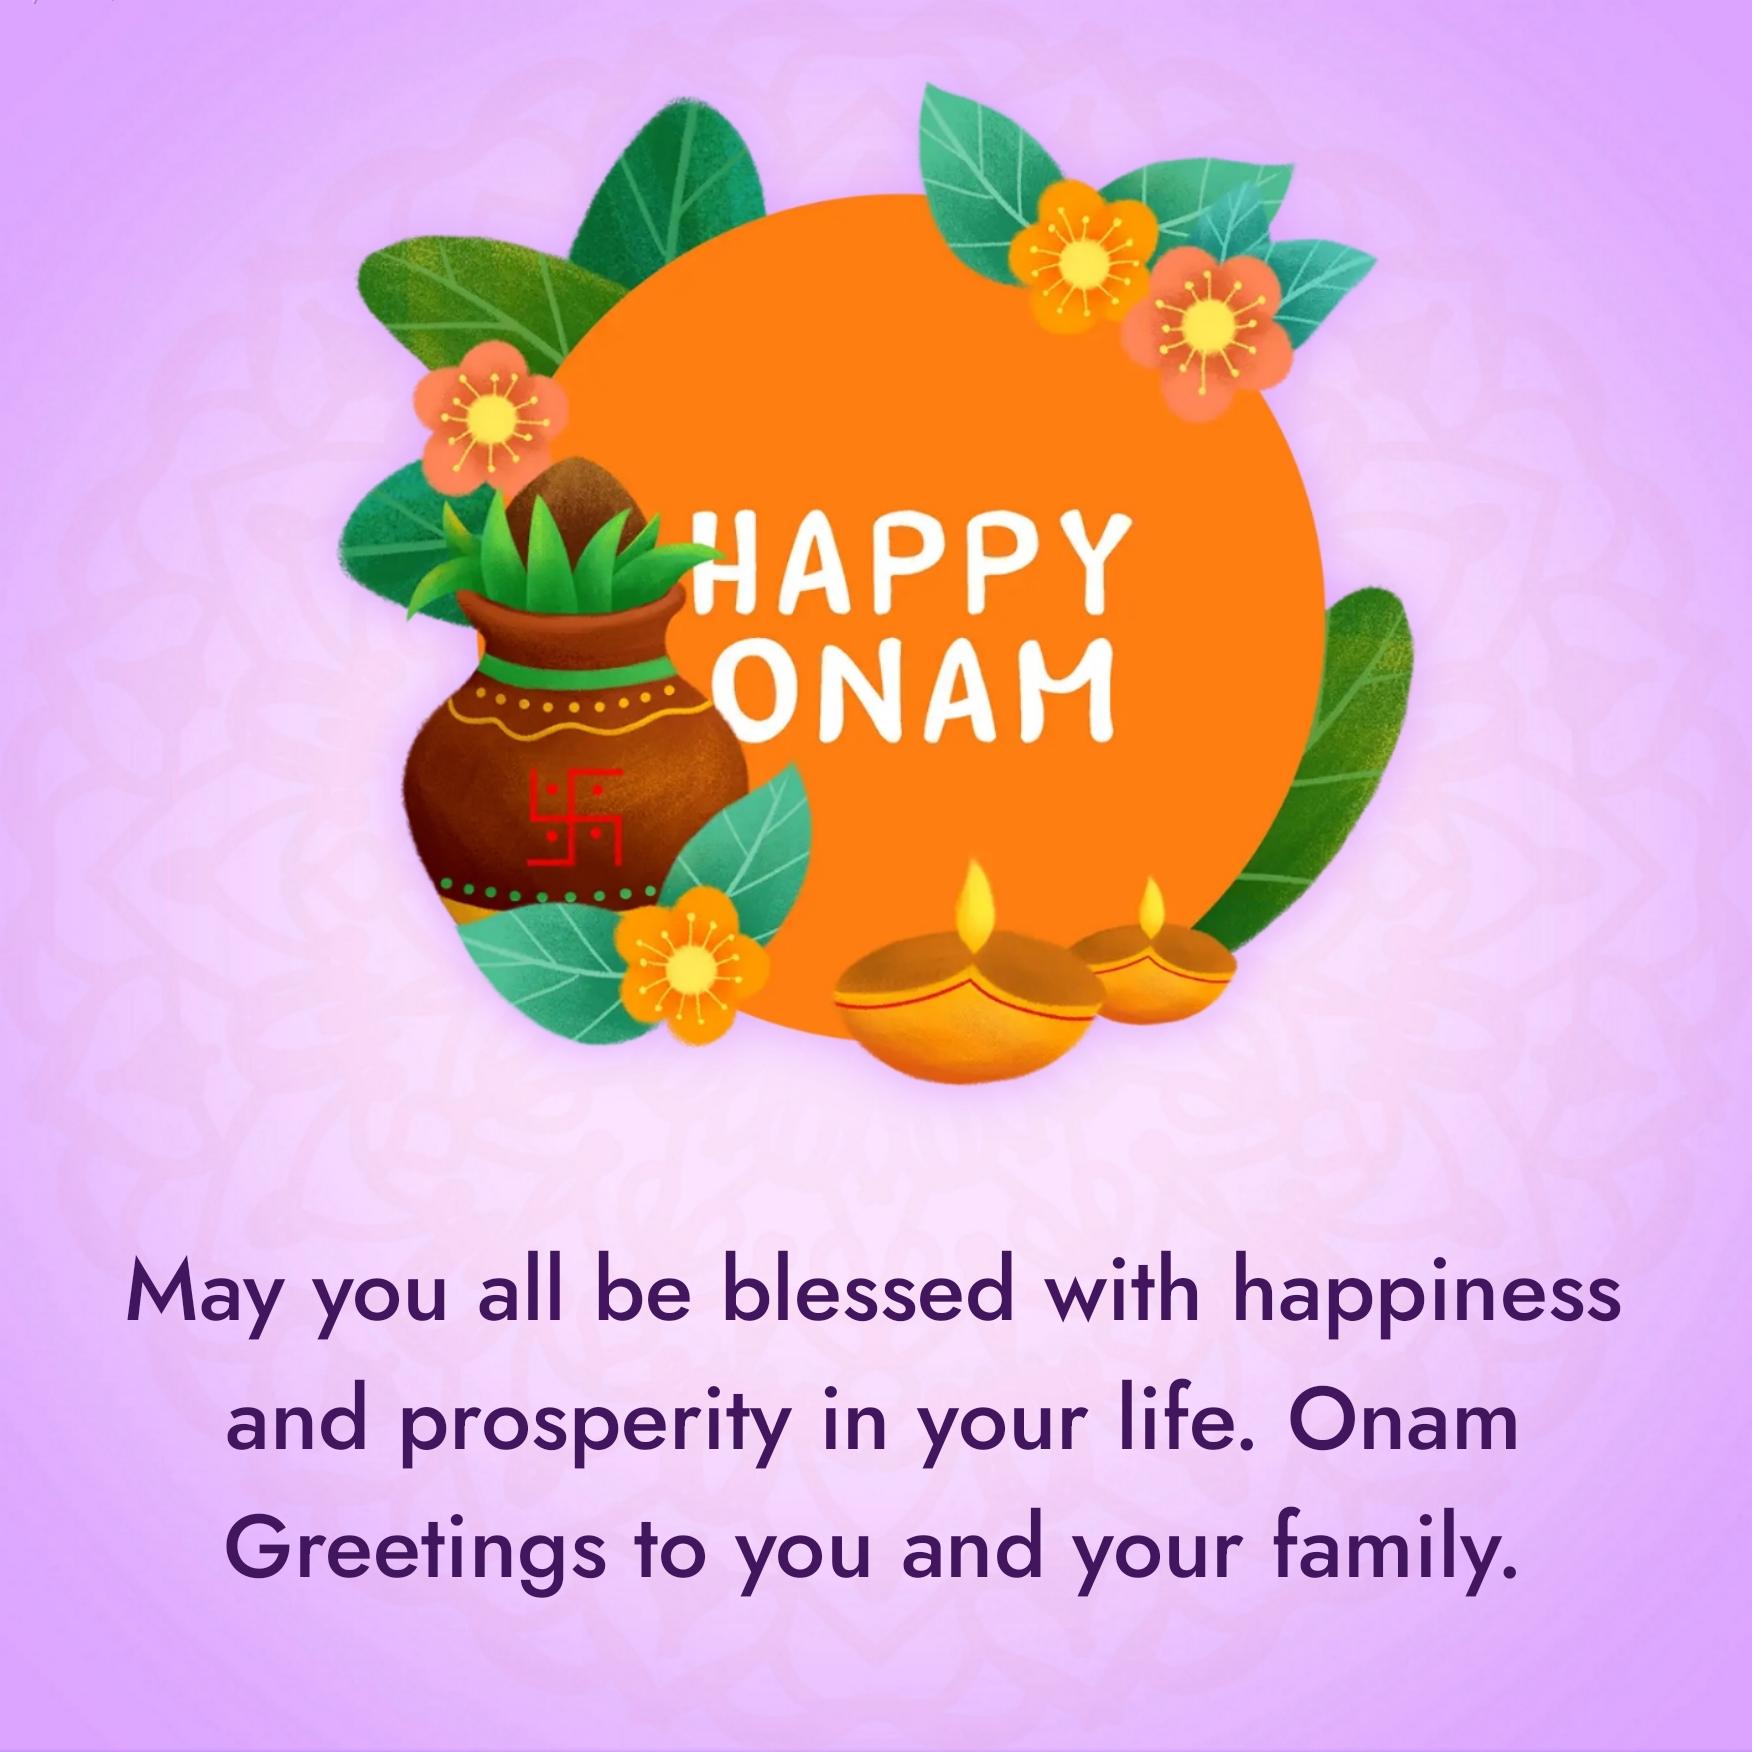 May you all be blessed with happiness and prosperity in your life